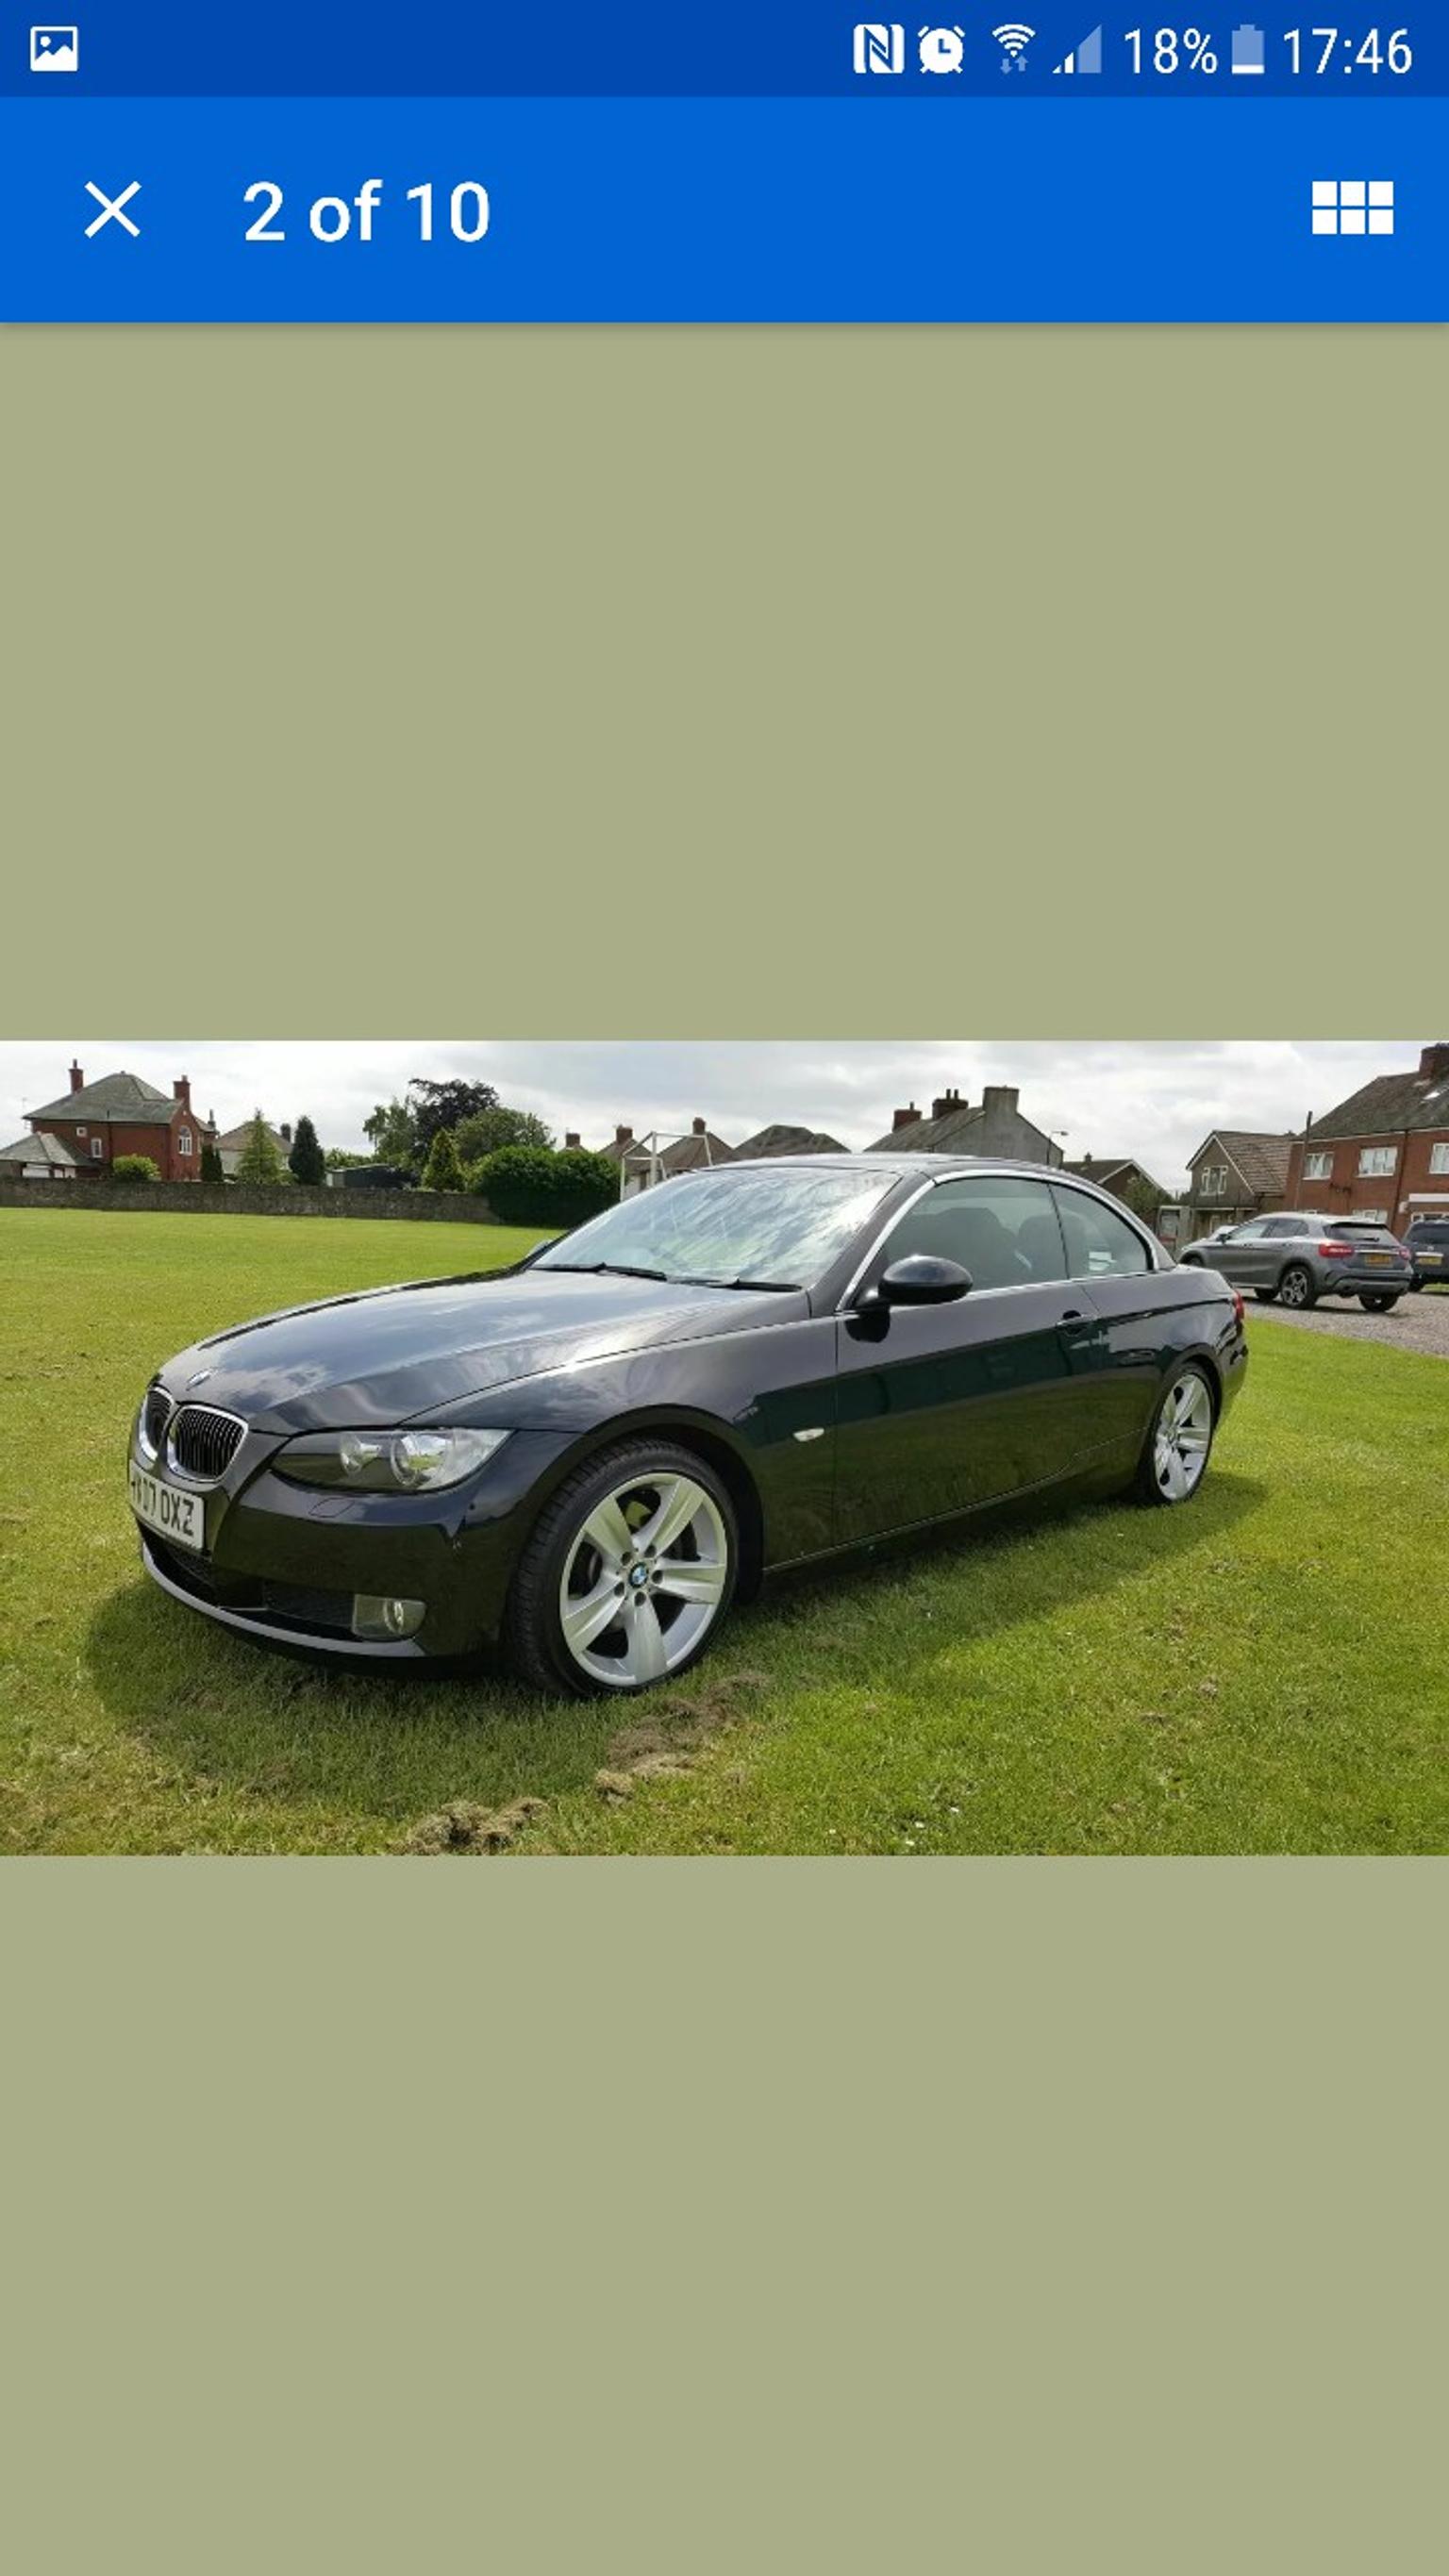 2007 Bmw 325 SE 3.0 ltr 6 speed convertible in Bolsover for £4,395.00 for sale | Shpock